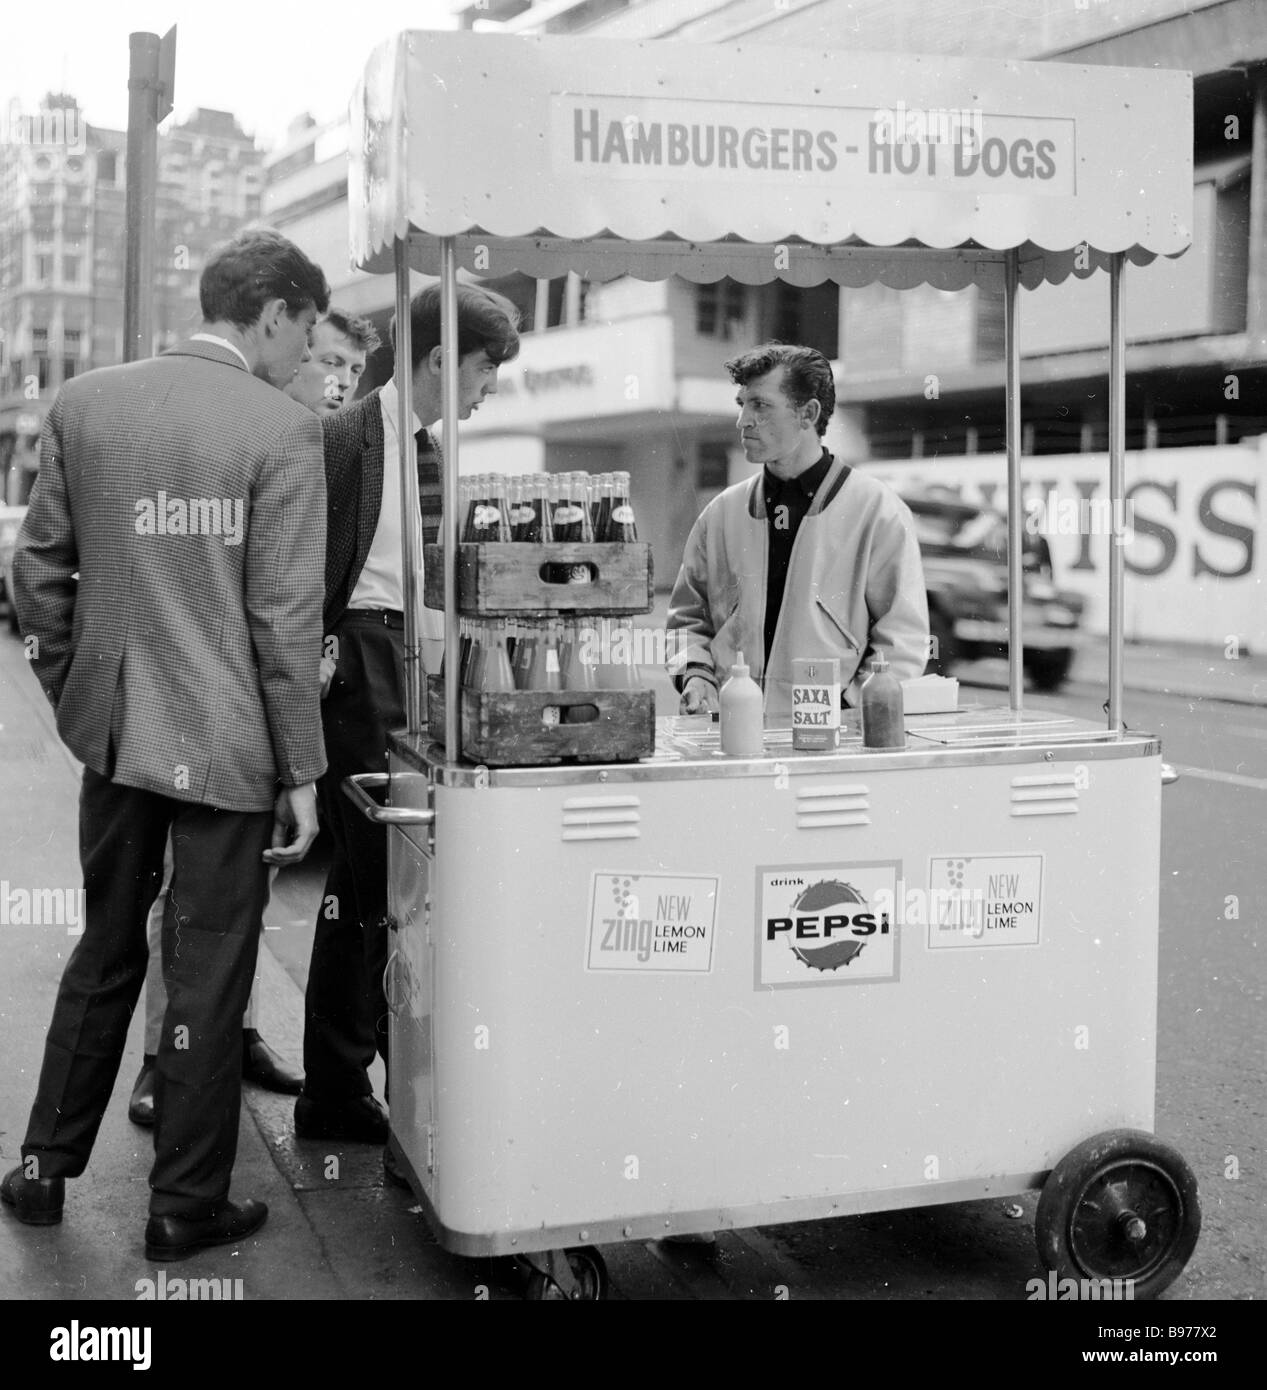 1950s, suited young men check what food and drink are available from a small snack or fast food street vendor in Wardour Street, London, England, UK. Stock Photo